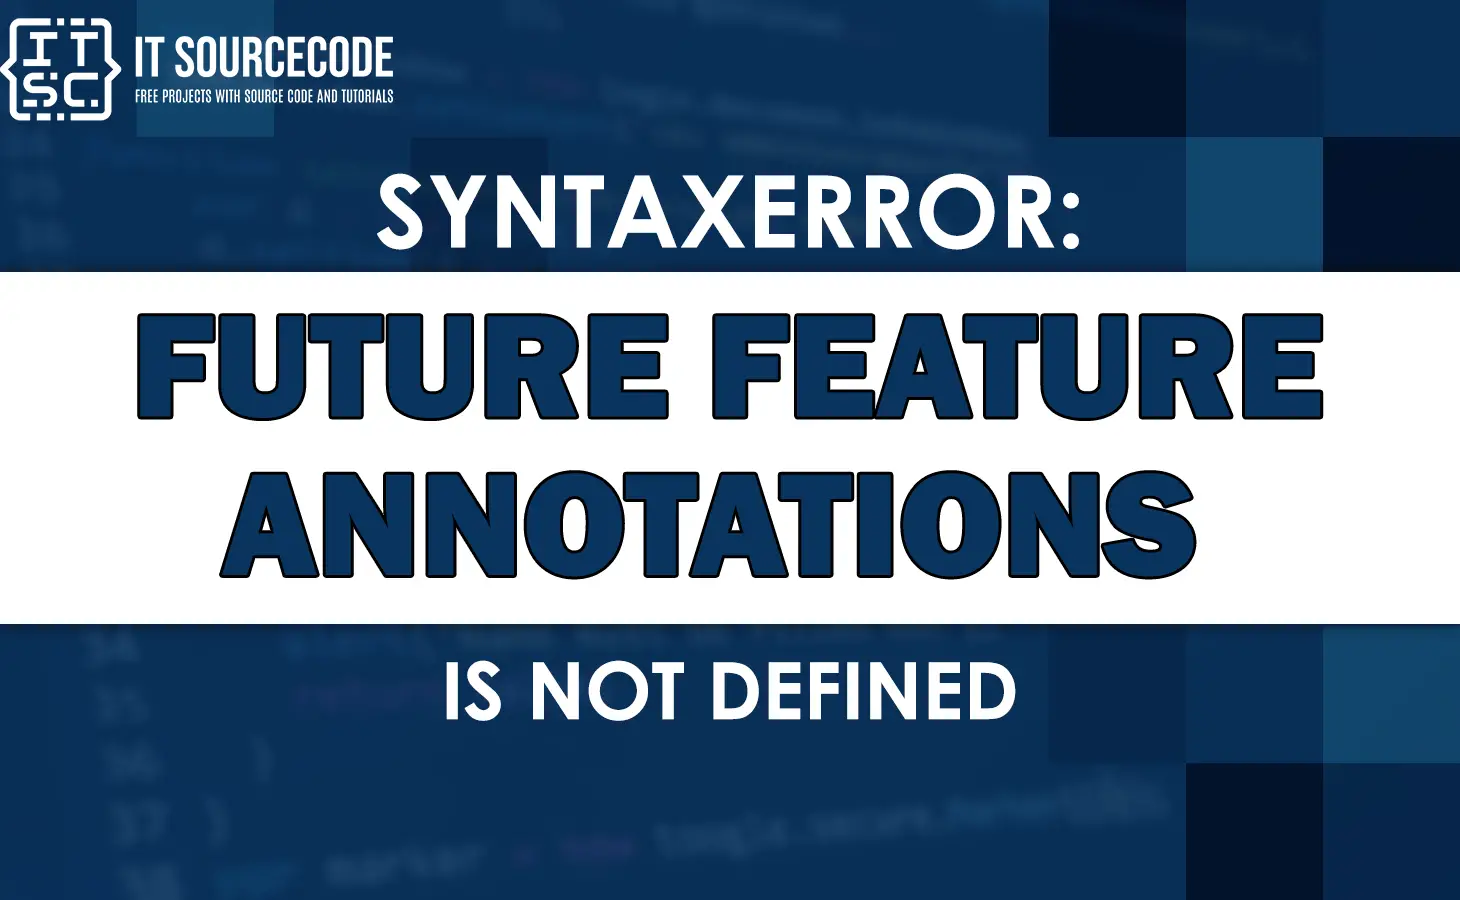 Syntaxerror: future feature annotations is not defined